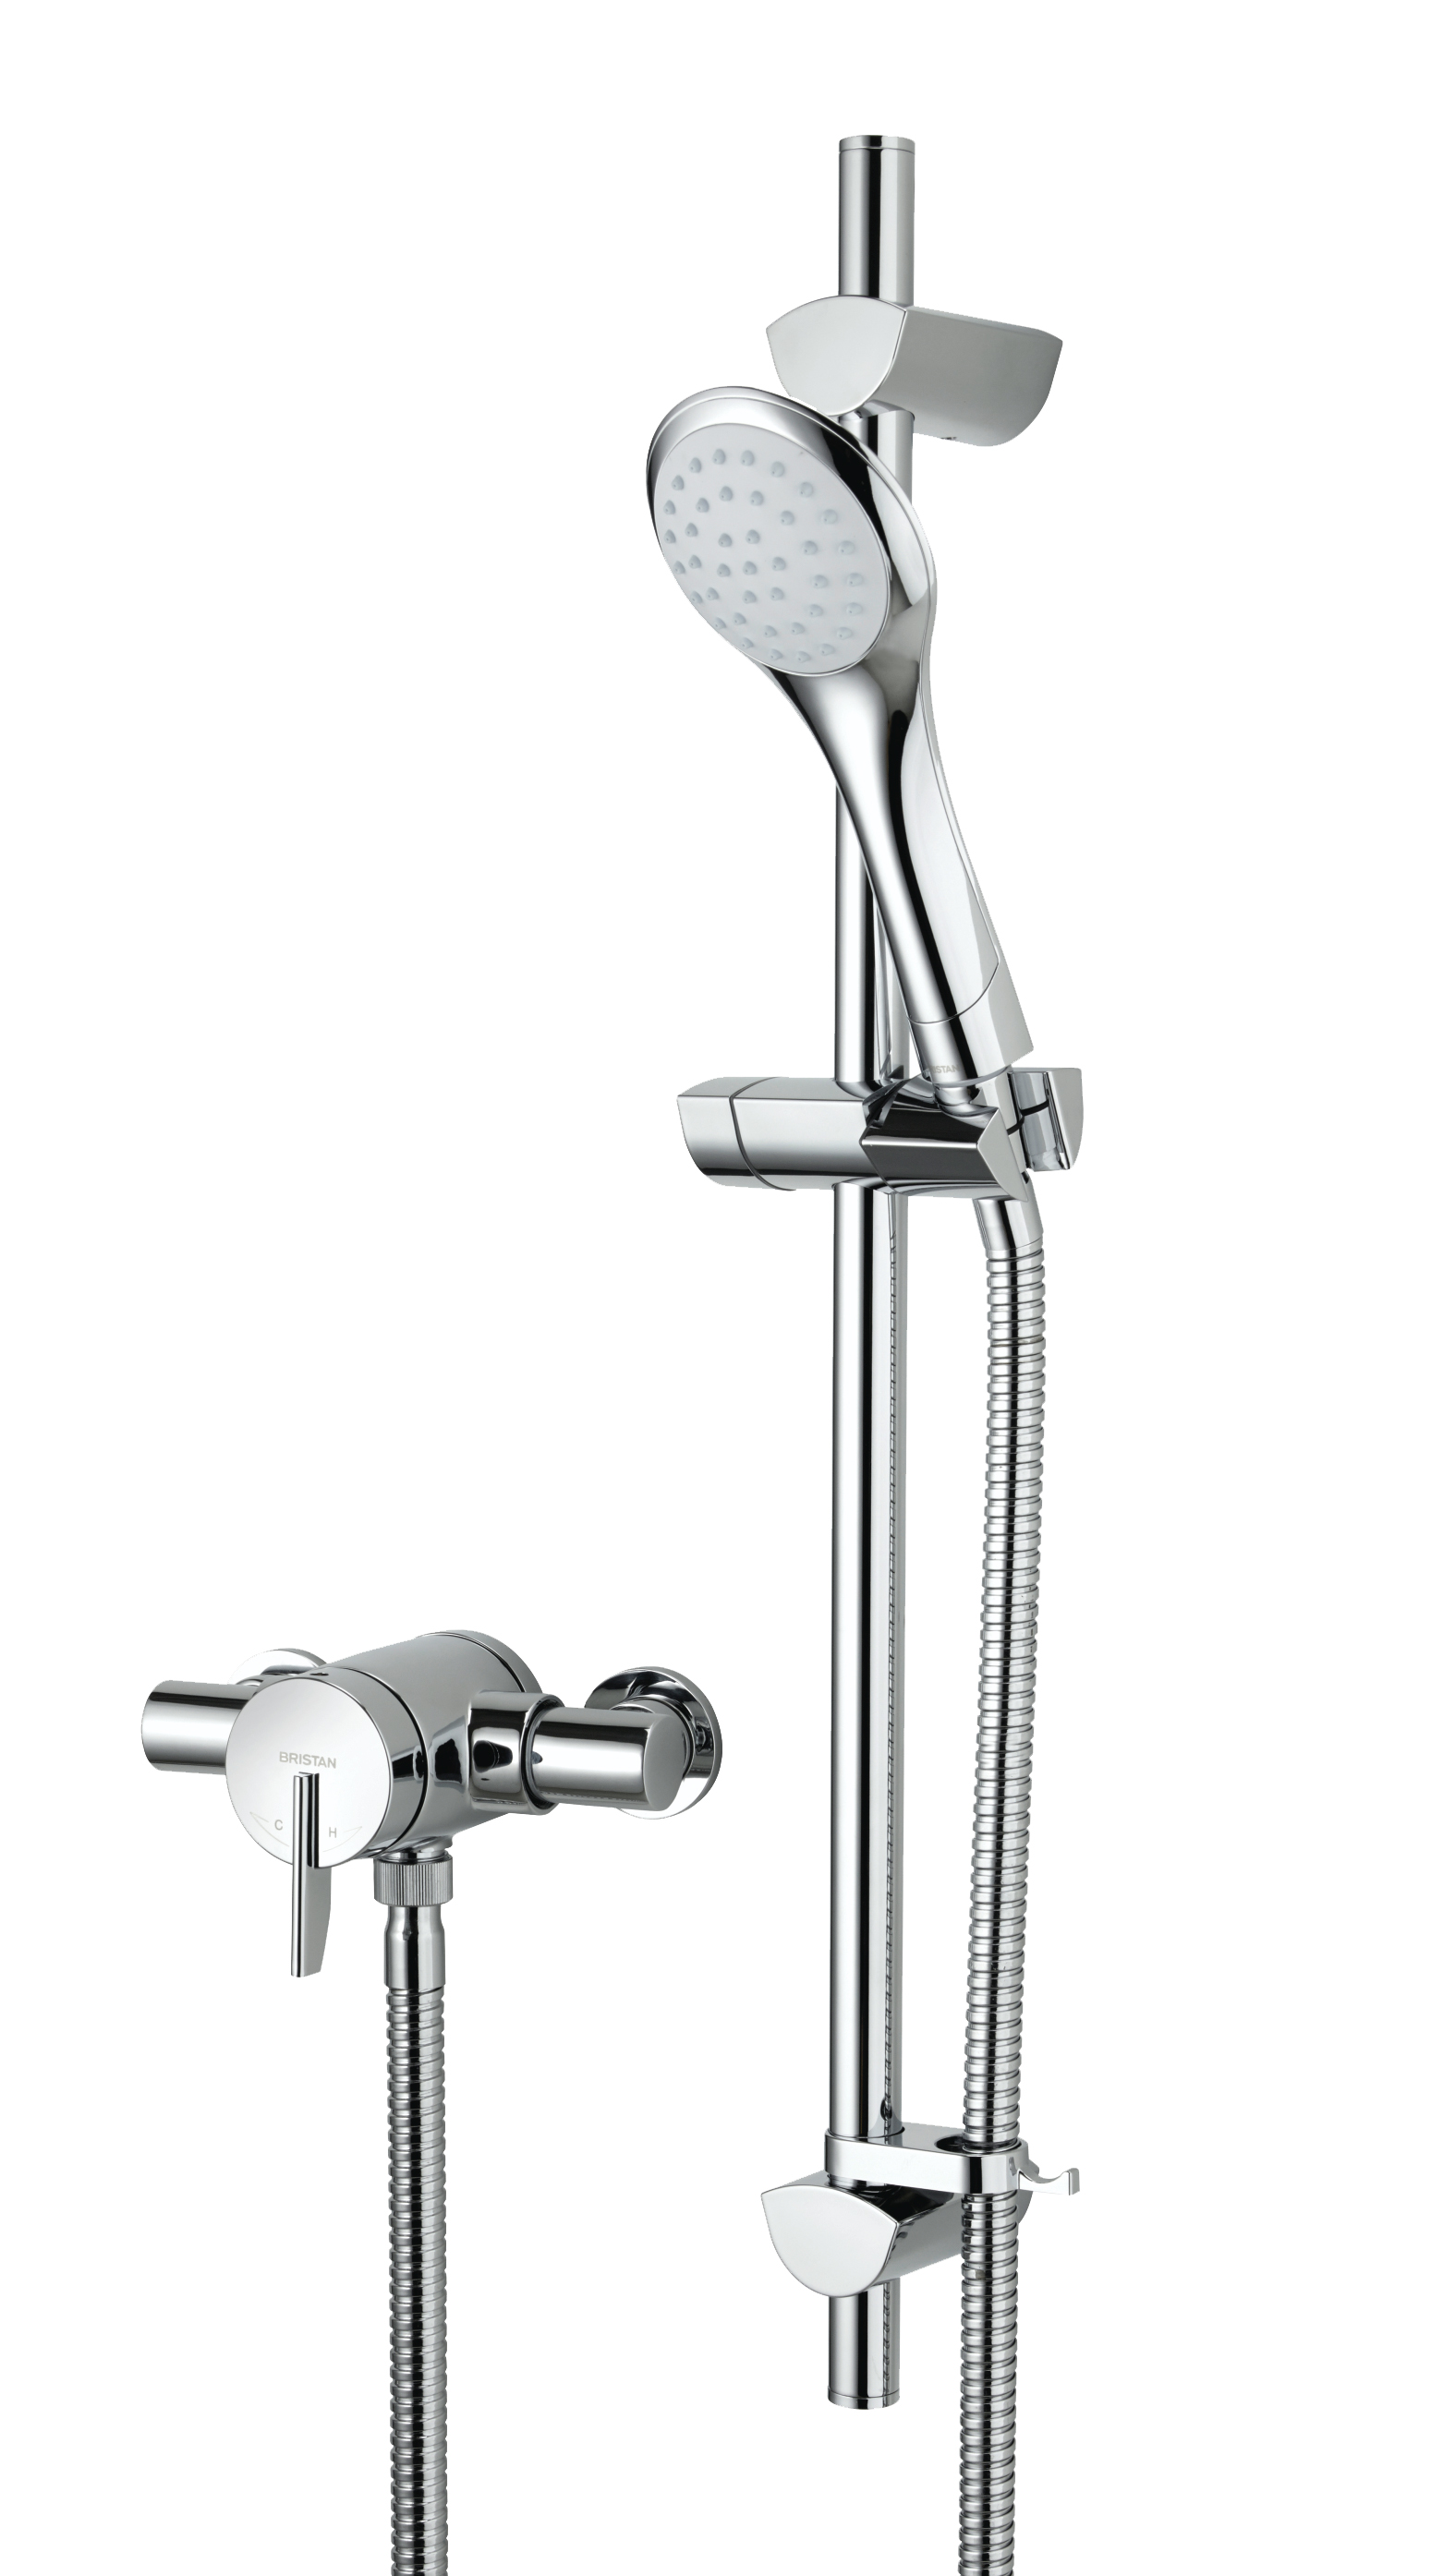 Bristan Sonique Exposed Thermostatic Single Control Mini Shower Valve With Adj Riser Kit and Single Function Handset Chrome